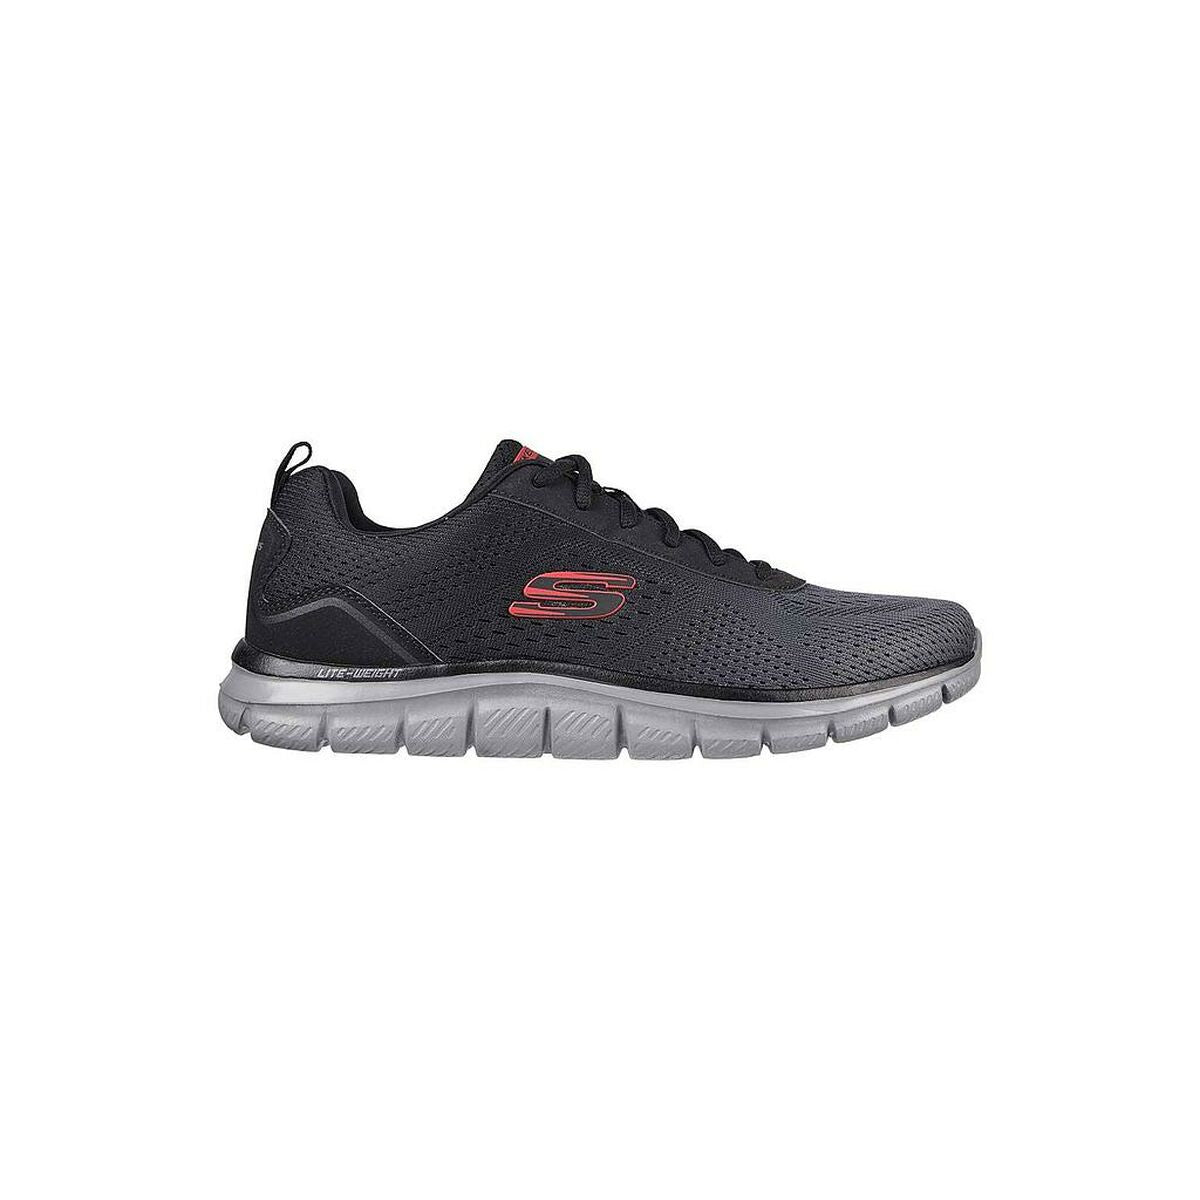 Running Shoes for Adults Skechers Black Grey